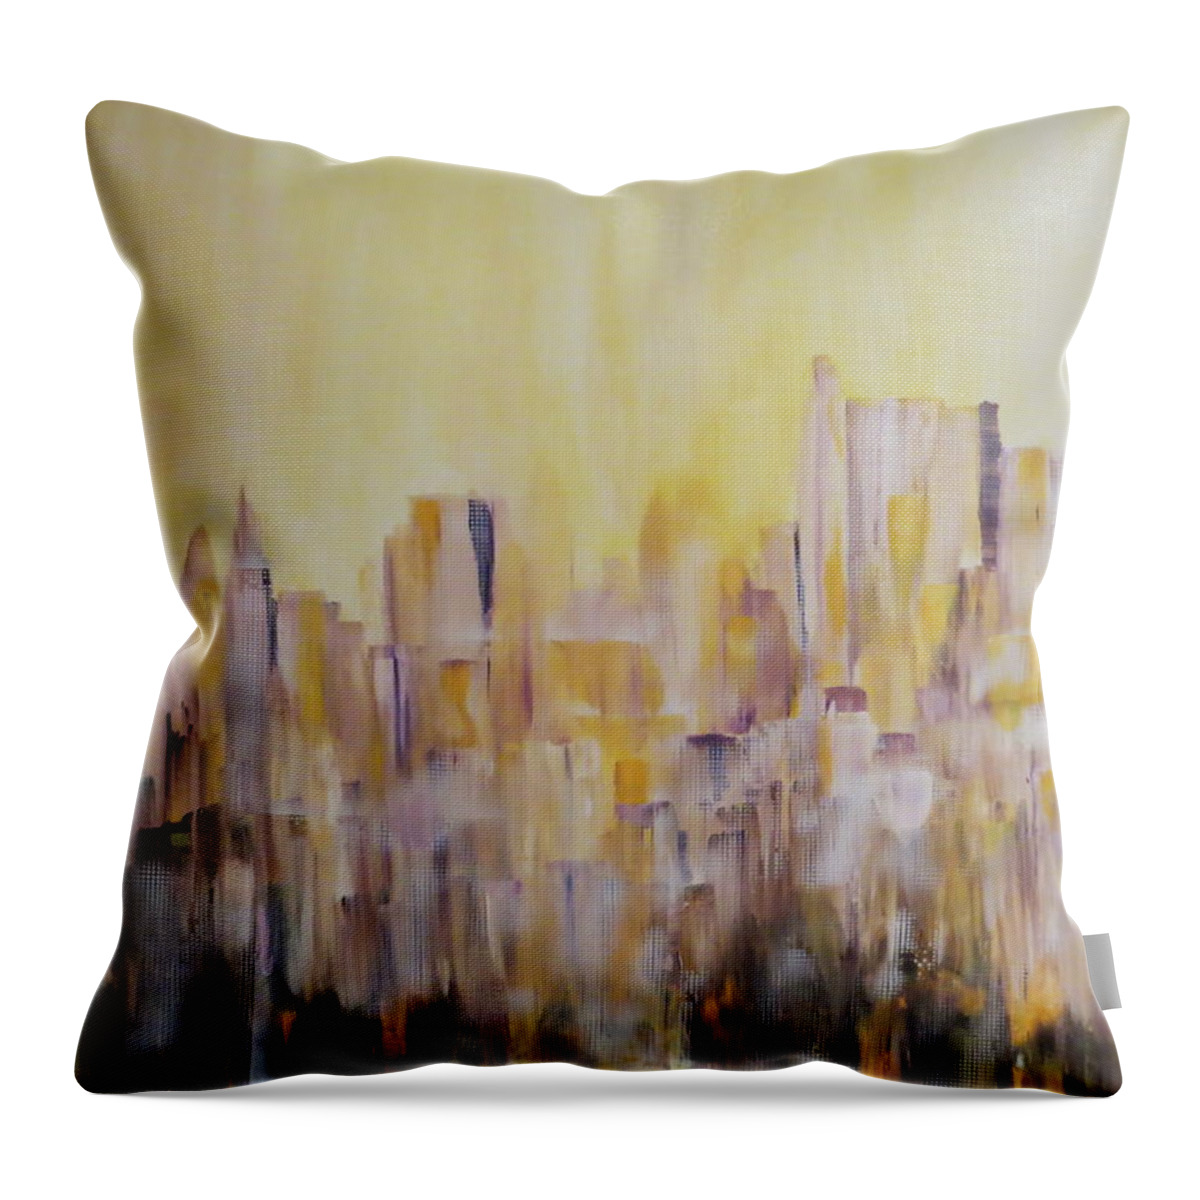 Cityscape Throw Pillow featuring the painting Your View?  by Soraya Silvestri